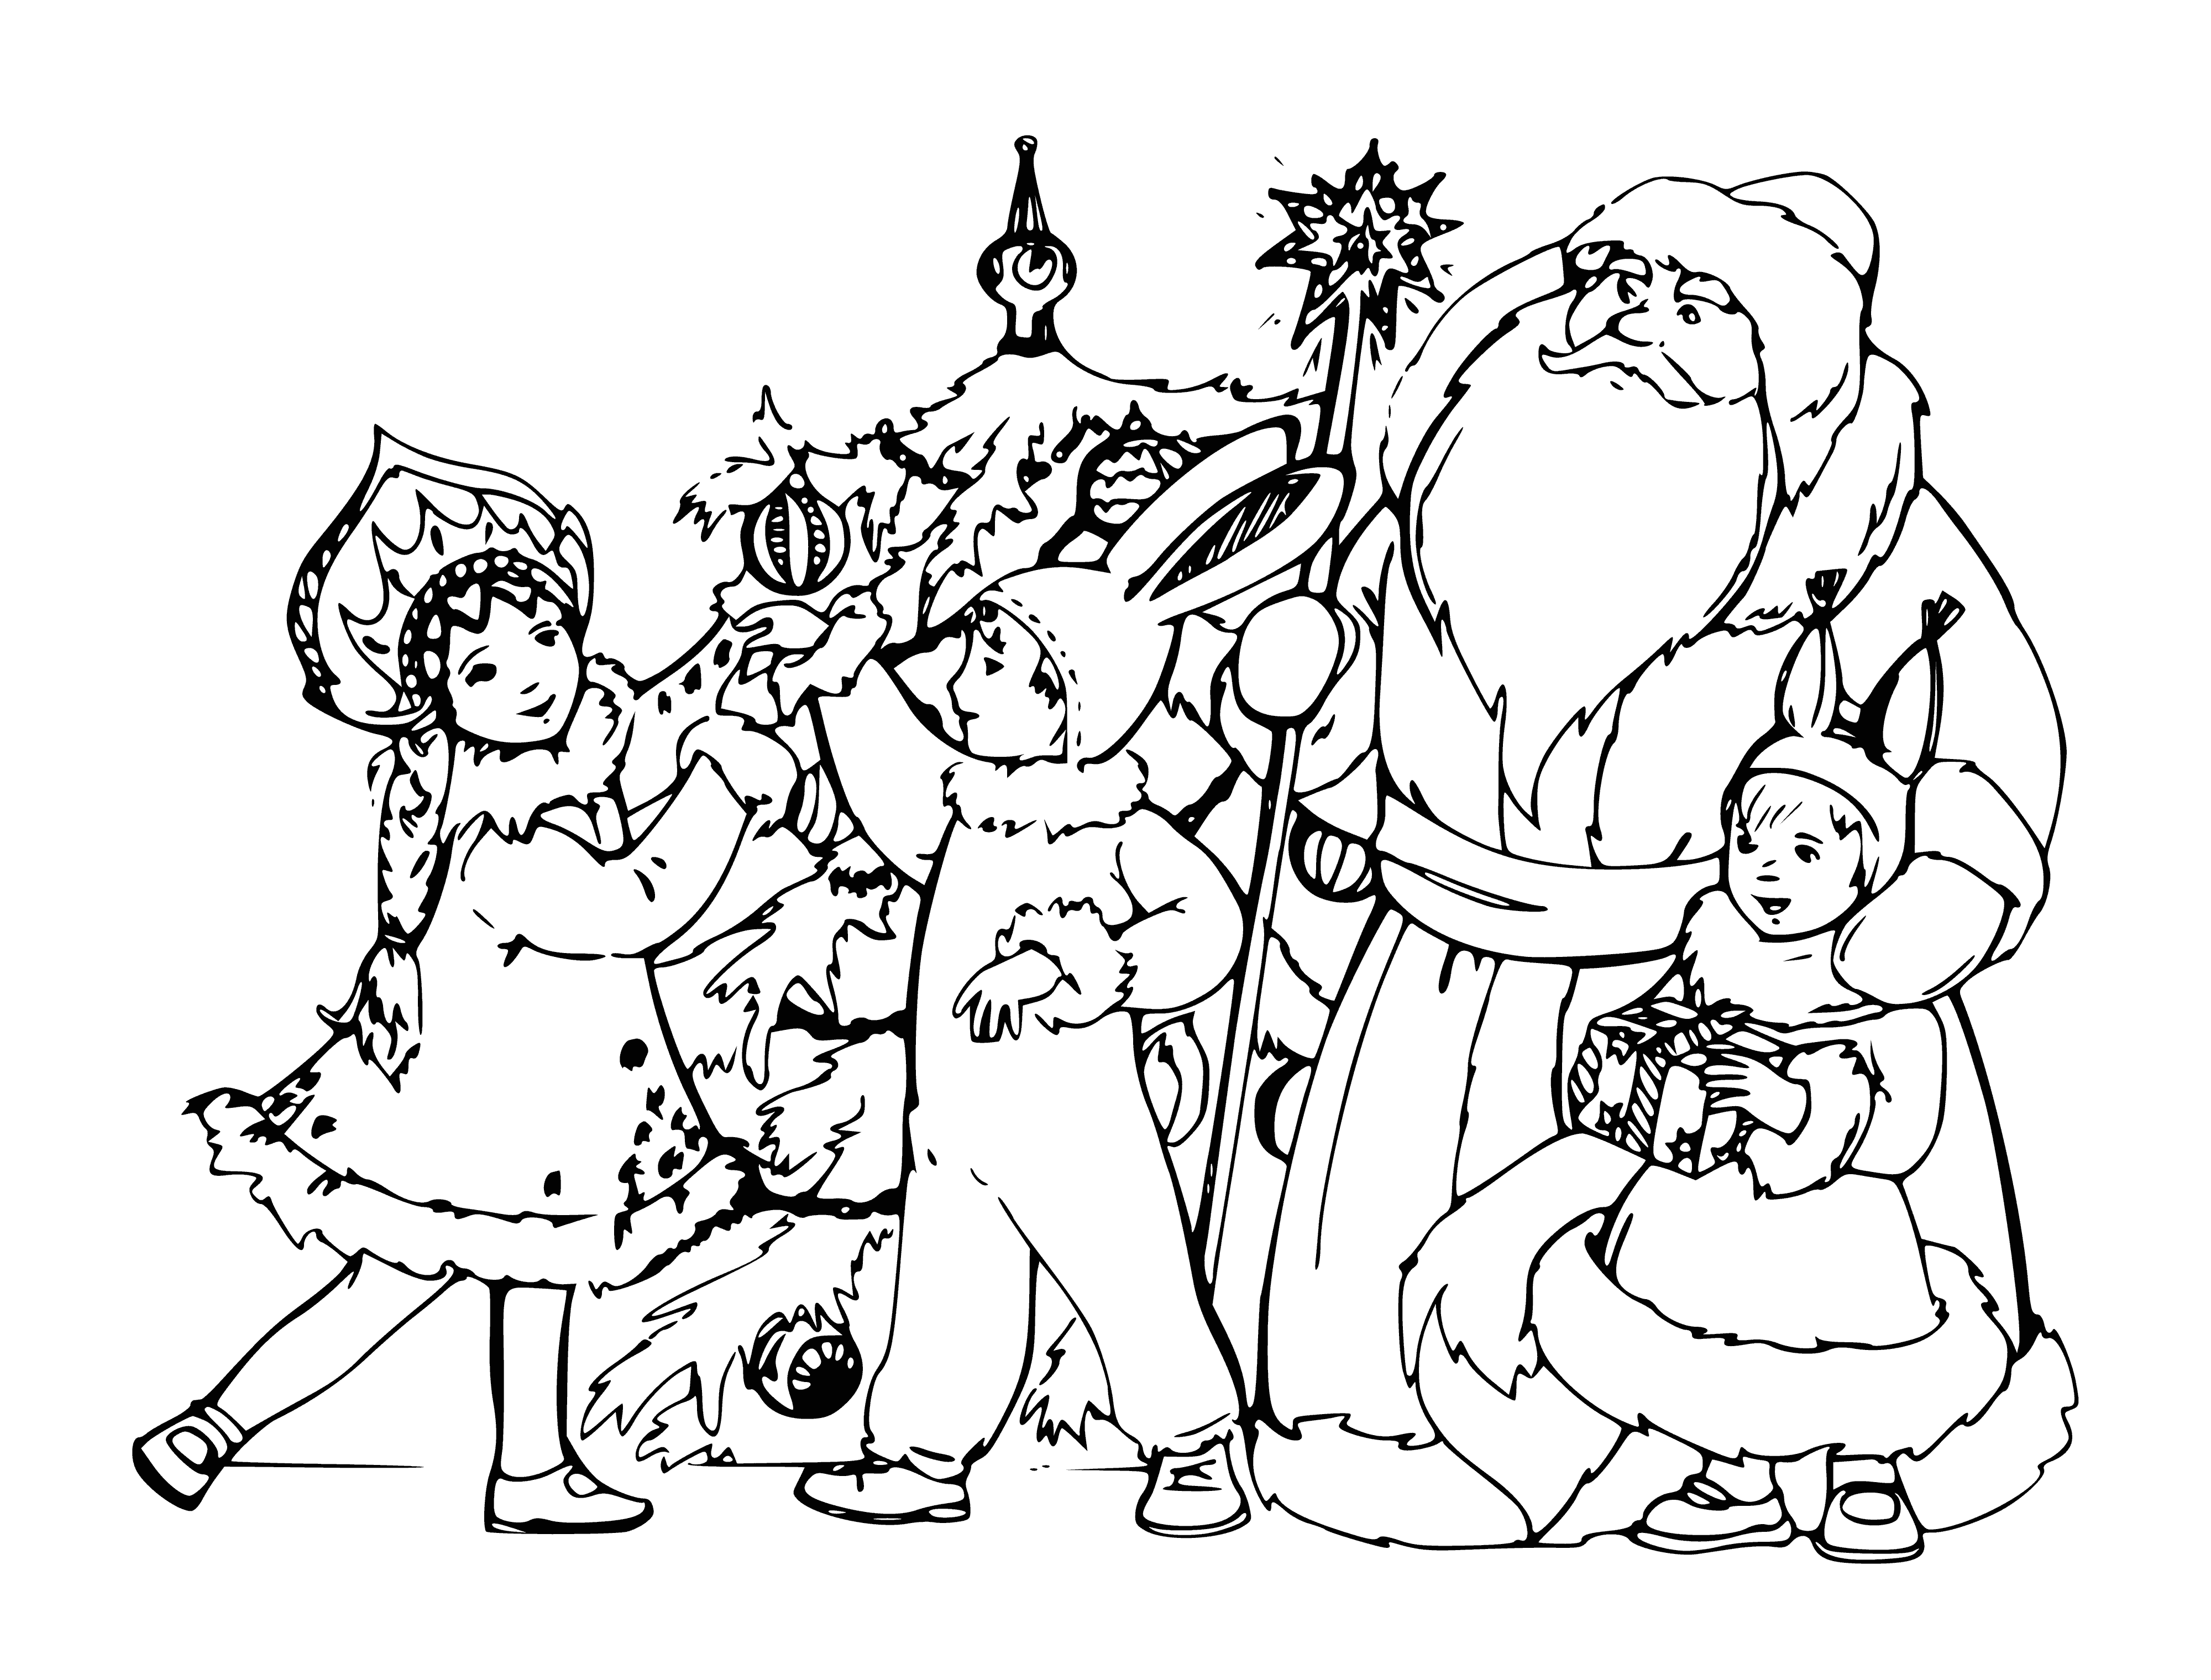 coloring page: Santa Claus stands next to a Christmas tree adorned with ornaments & lights, holding presents & wearing a red suit & white beard.